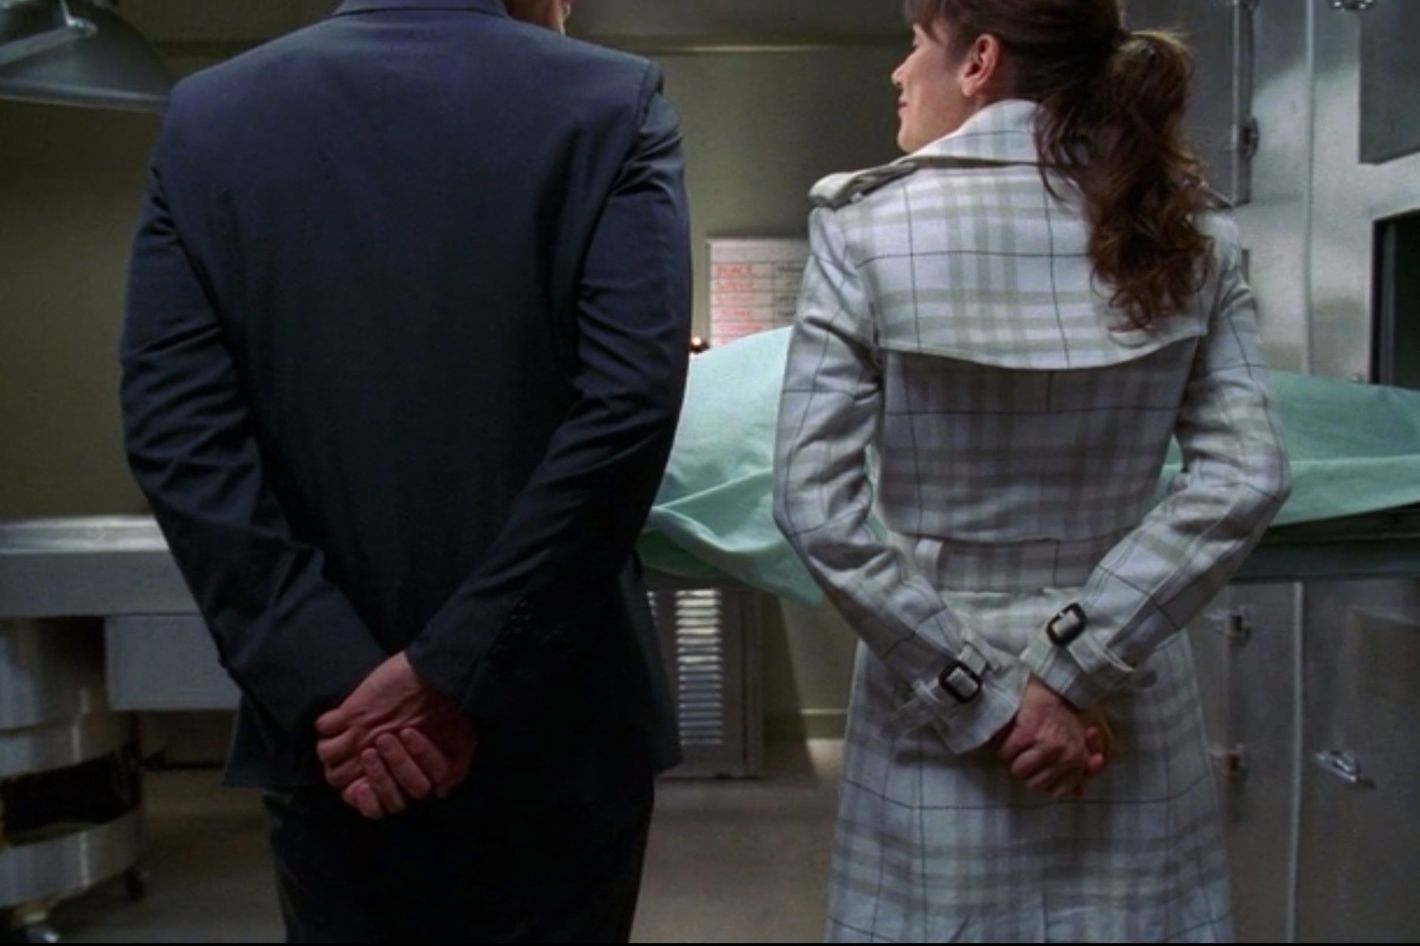 Ned (Lee Pace) and Chuck (Anna Friel) are pictured holding their own hands behind their backs. 

Pushing Daisies. Season 1, Episode 1: "Pie-Lette." 2007-2009. ABC.